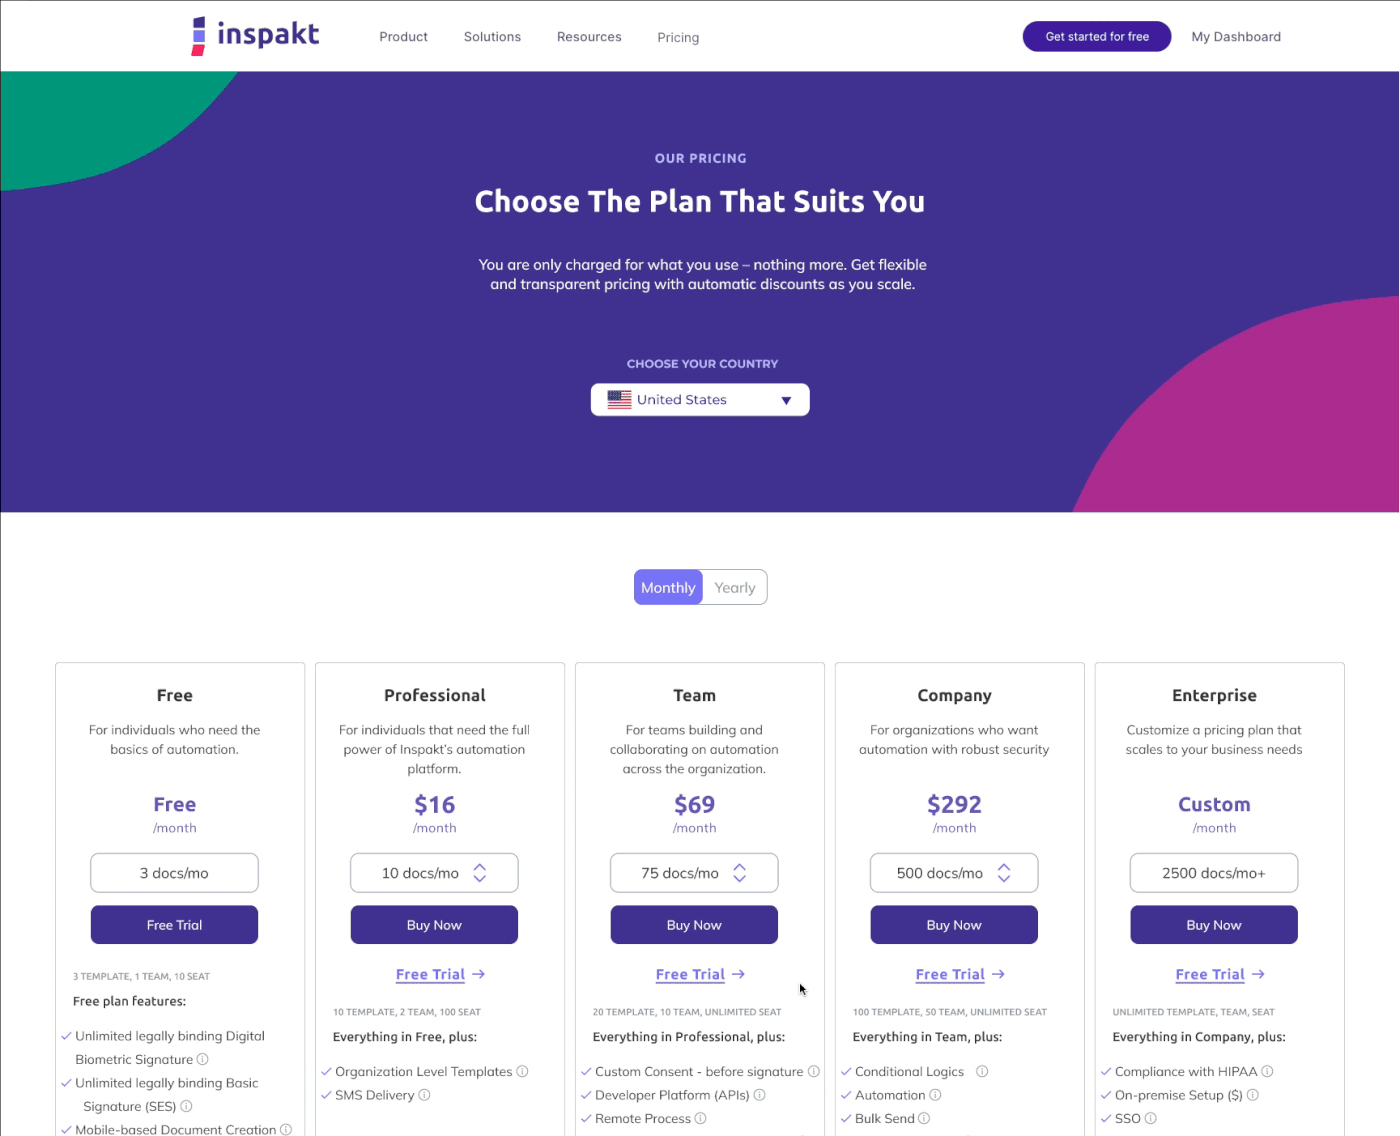 Pricing Page pricing table UI/UX UX design